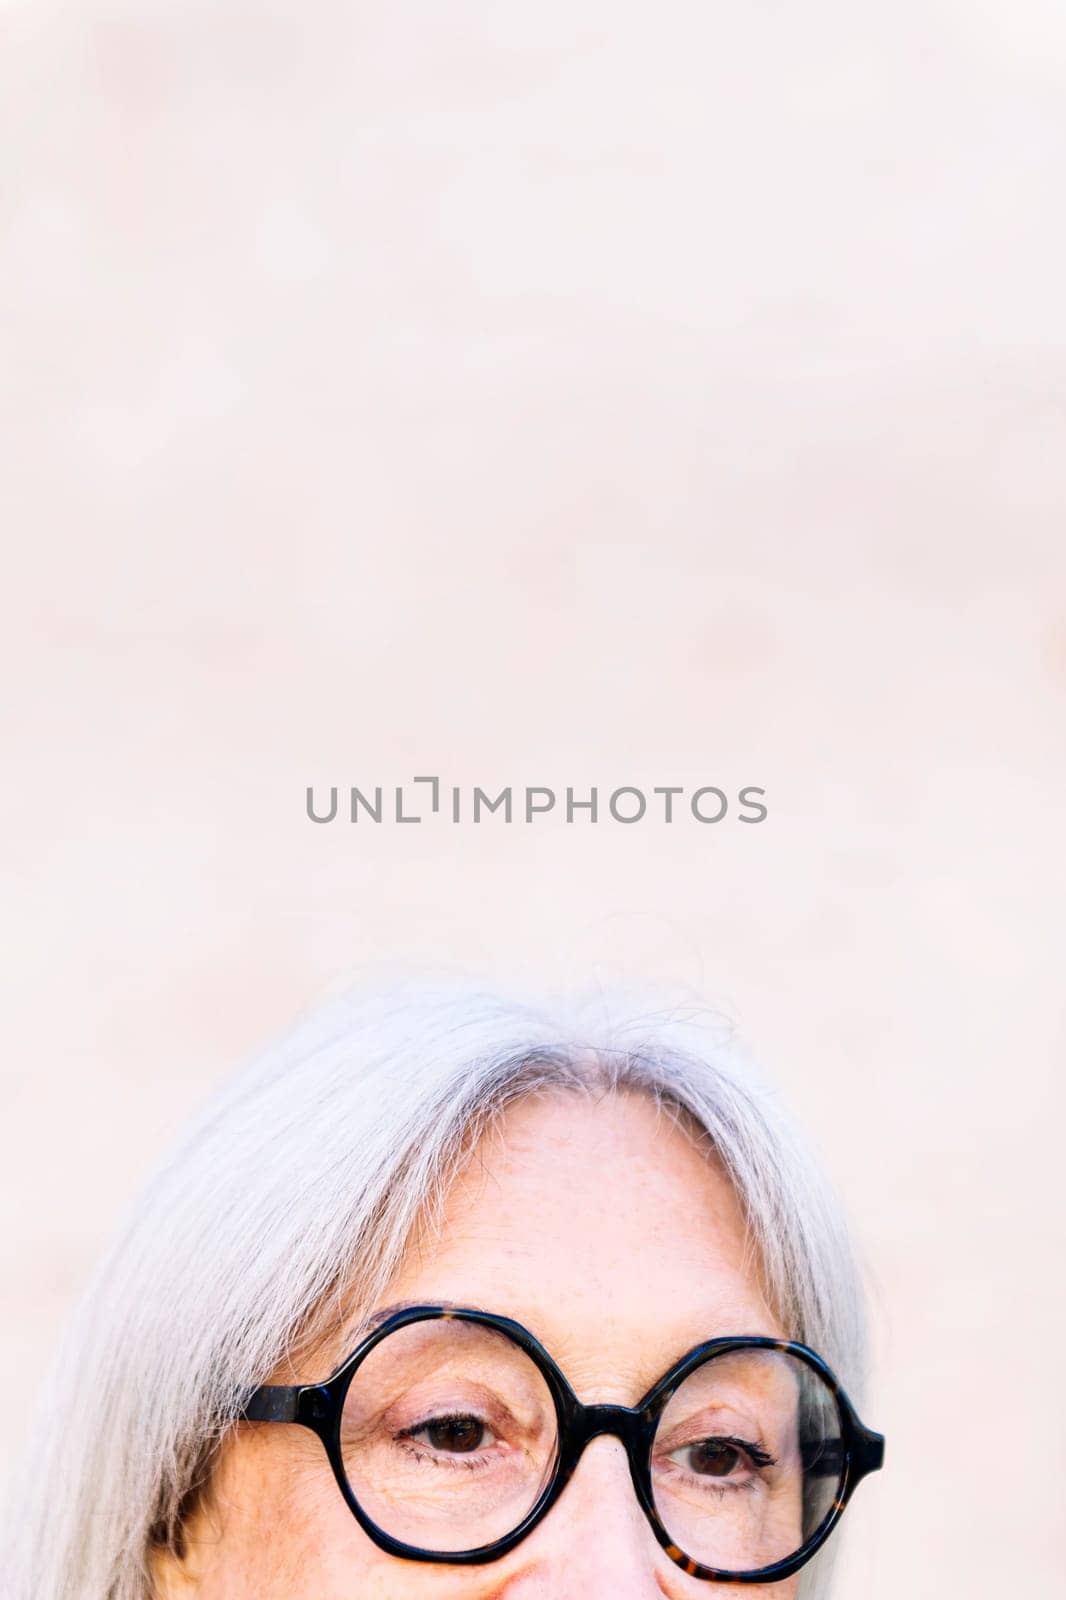 detail of the eyes of senior woman with glasses by raulmelldo